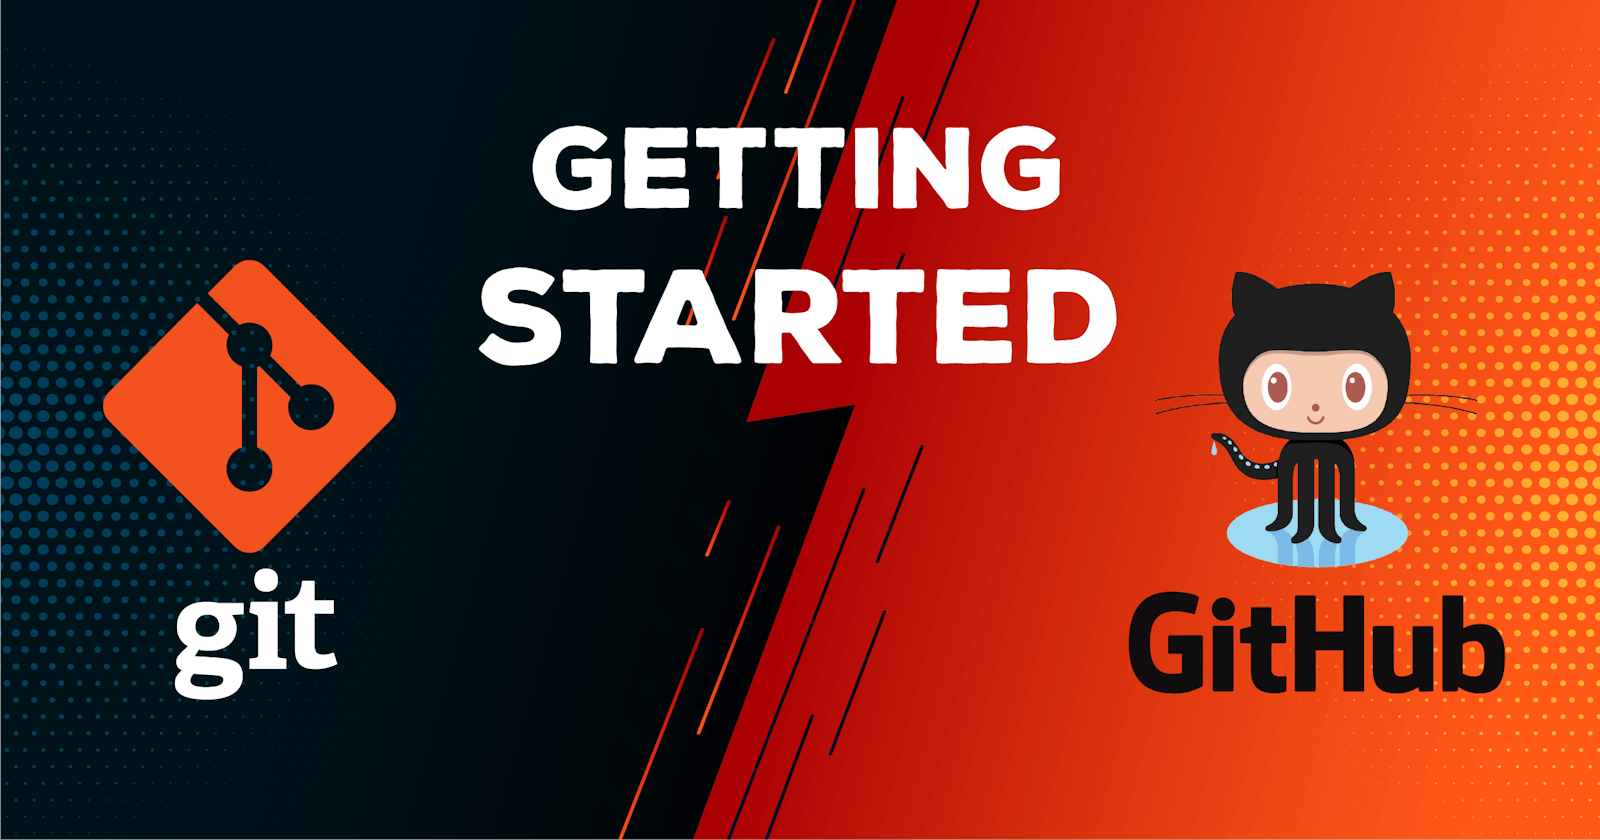 Getting Started with Git & Github